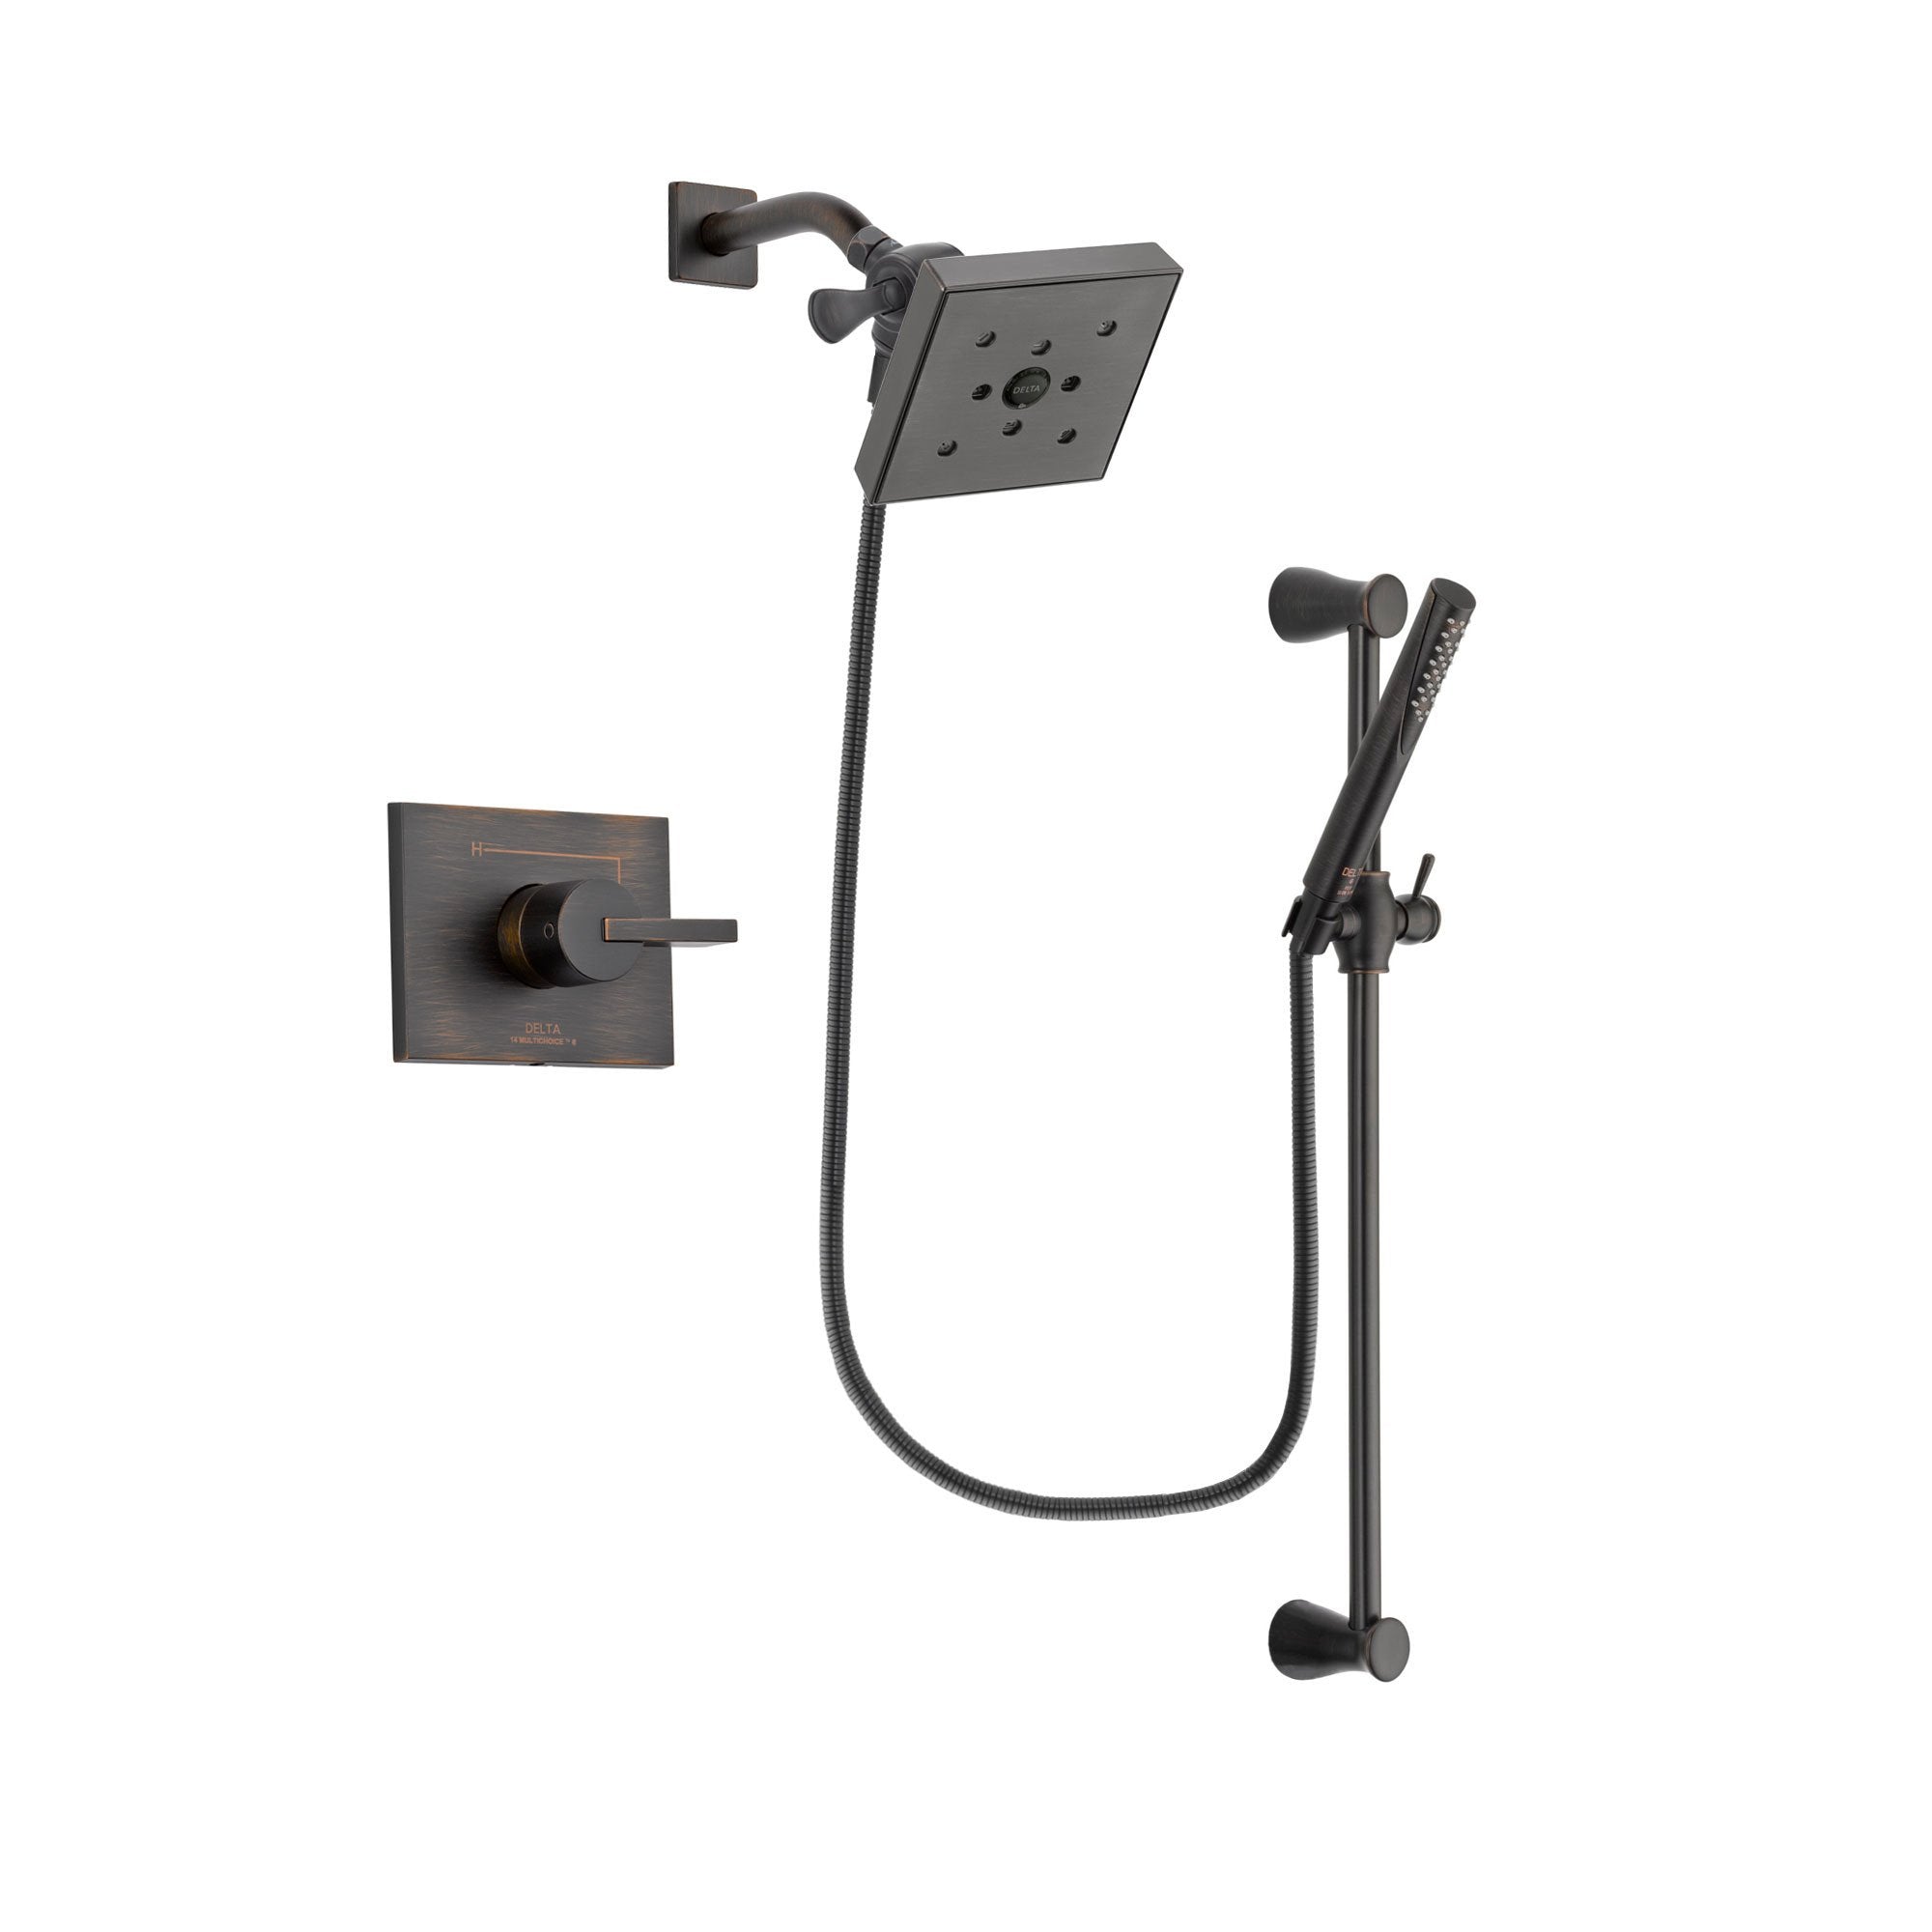 Delta Vero Venetian Bronze Finish Shower Faucet System Package with Square Shower Head and Modern Hand Shower with Slide Bar Includes Rough-in Valve DSP3168V